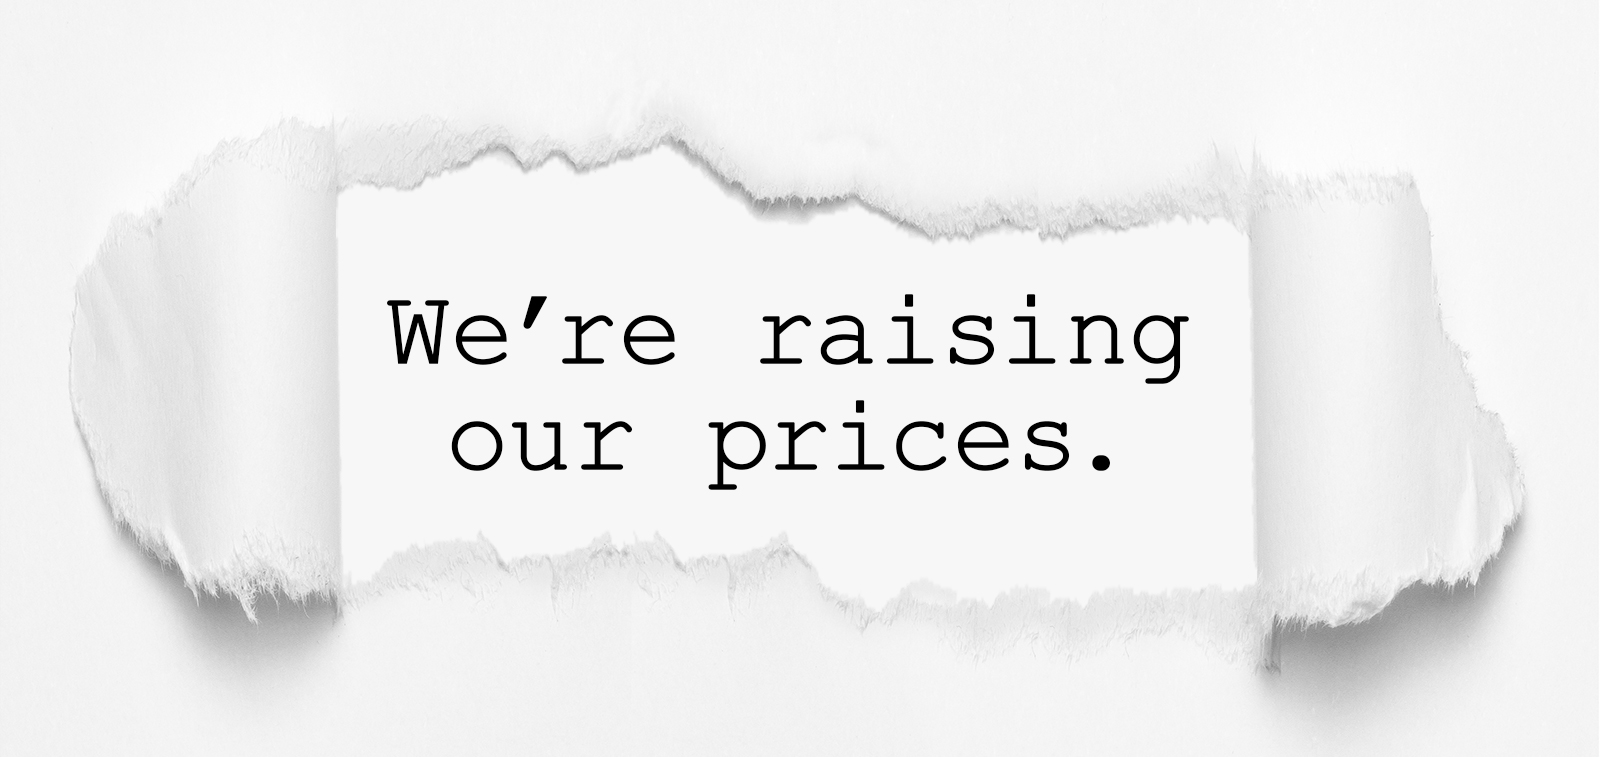 We’re raising our prices.